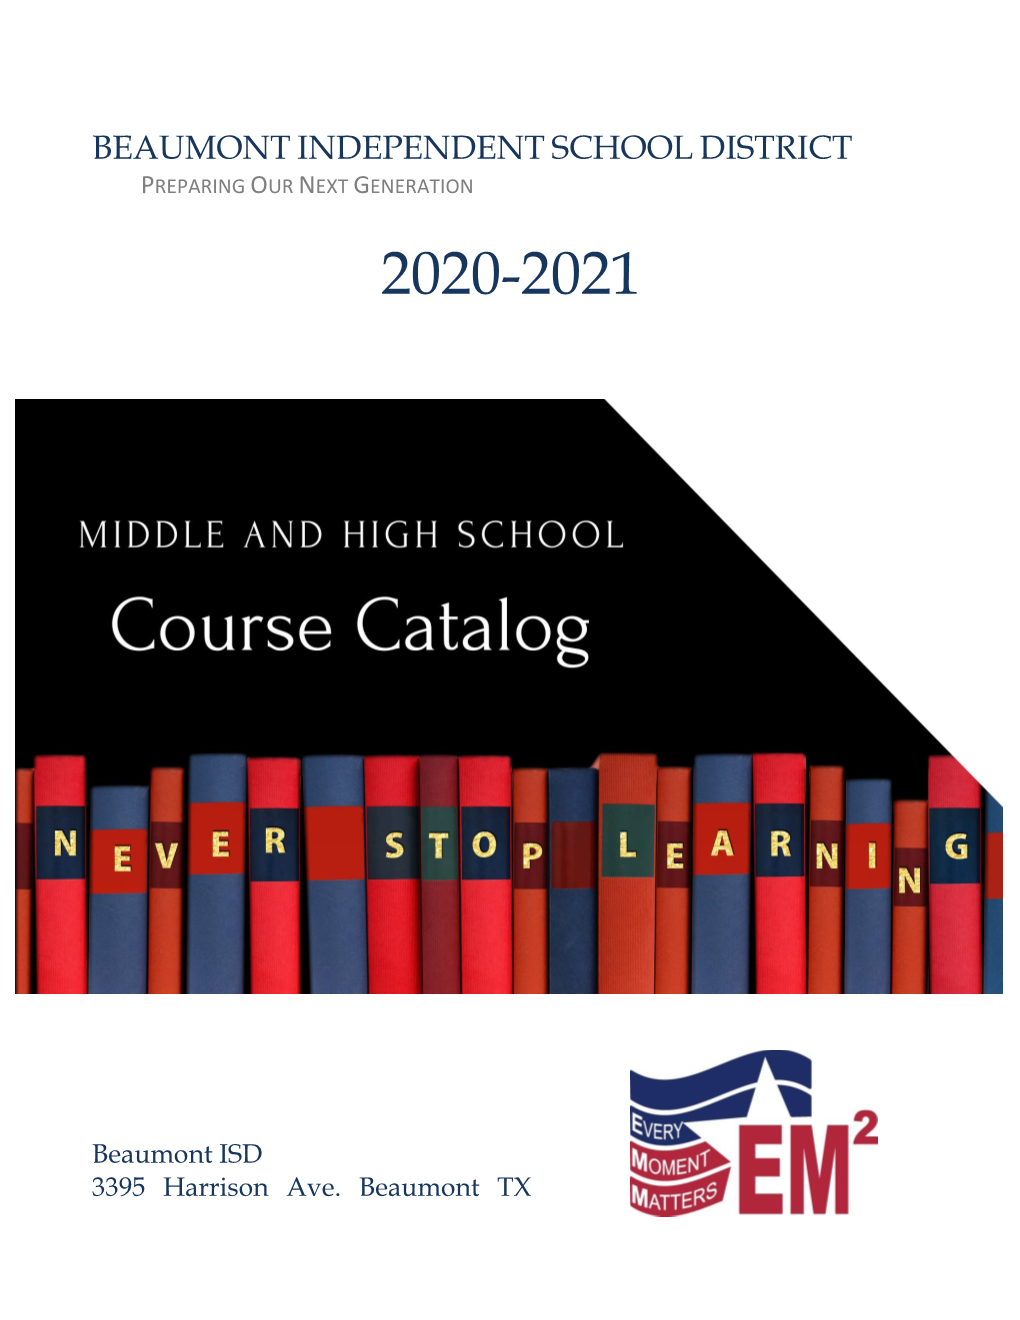 Middle and High School Course Catalog